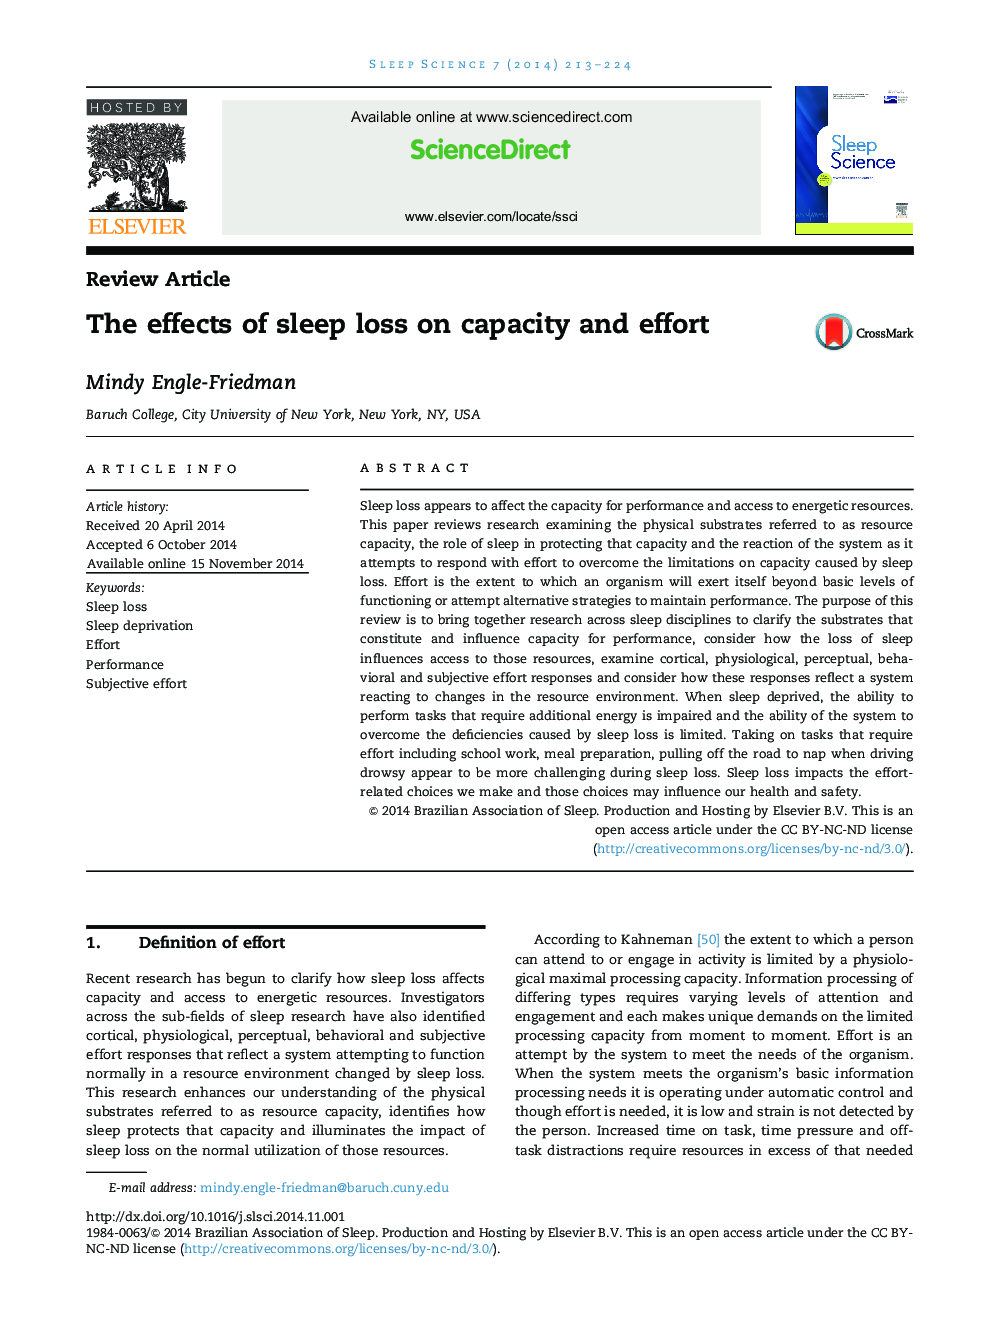 The effects of sleep loss on capacity and effort